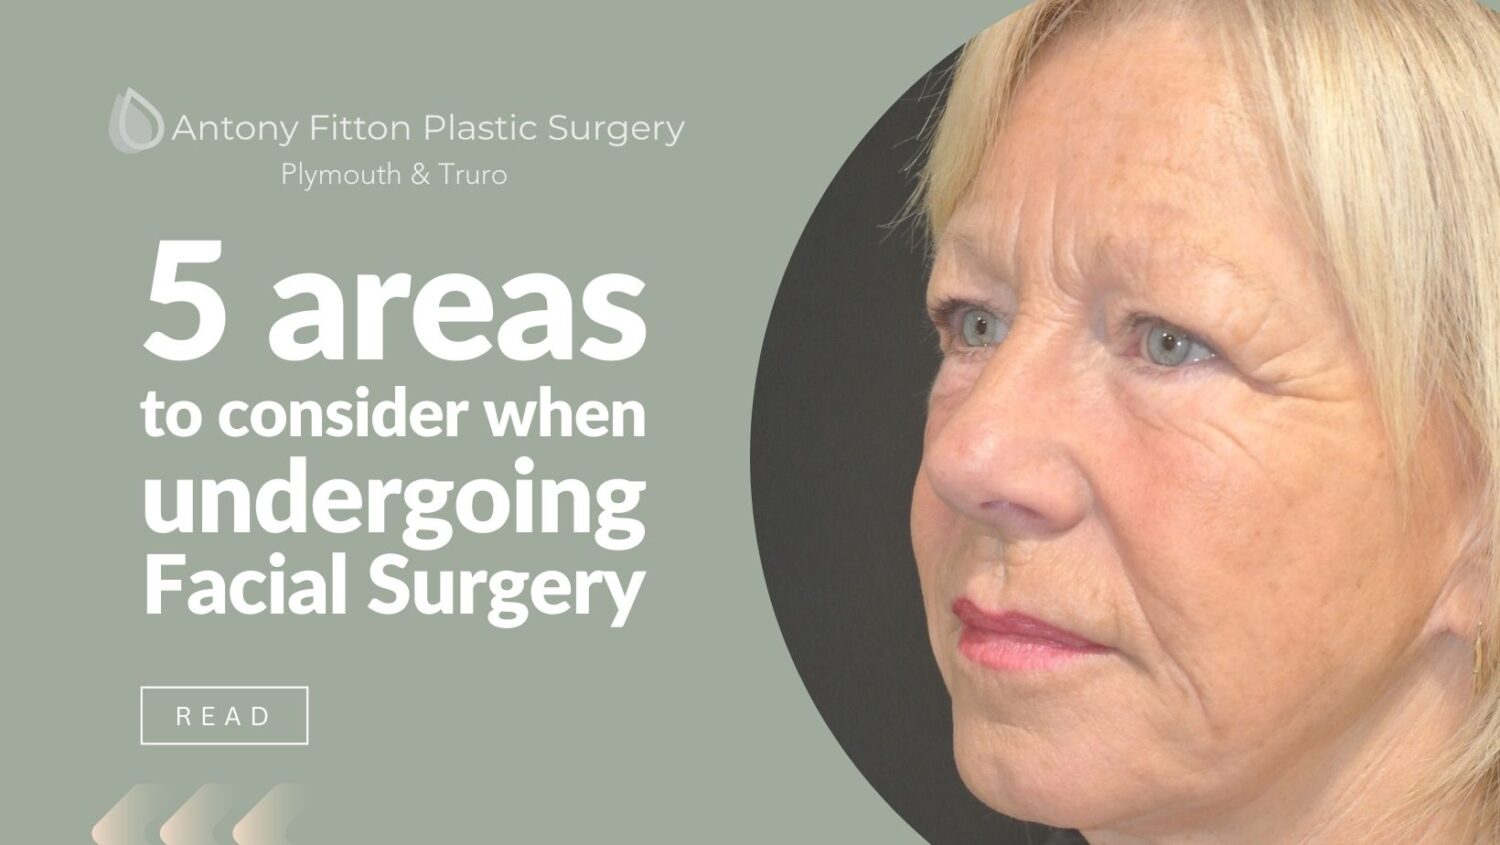 The 5 main areas to consider when undergoing Facial Surgery - Get reconstructive or aesthetic Facial Surgery in Plymouth.